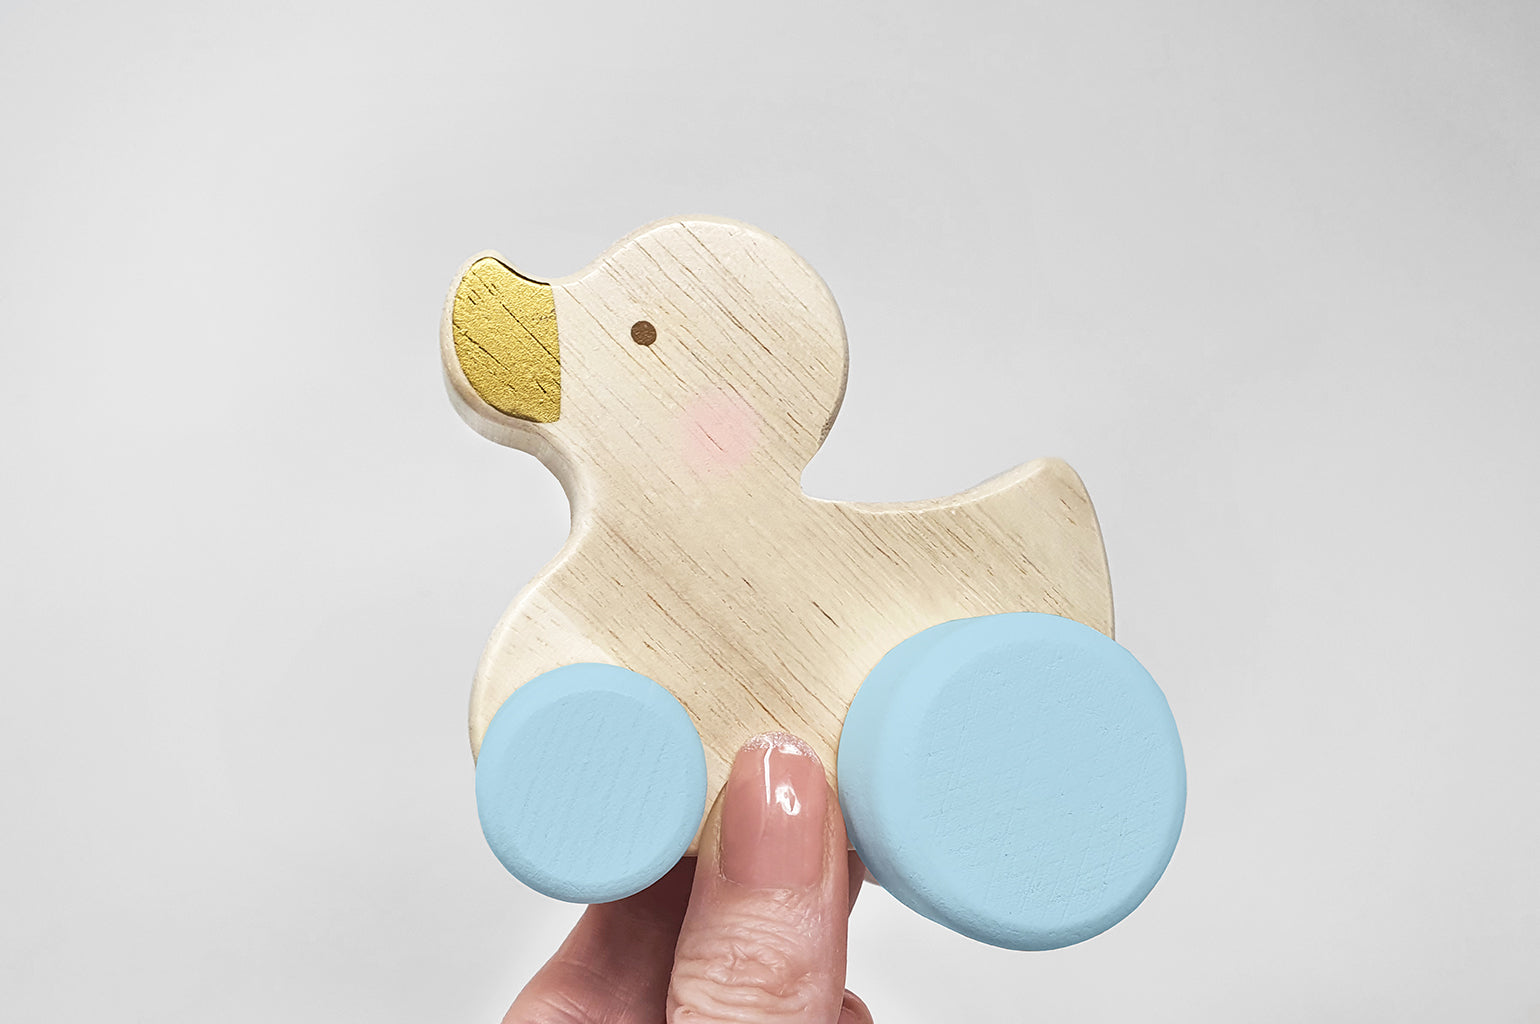 Copy of Wooden Duck Push Along Baby Toy - Blue/gold